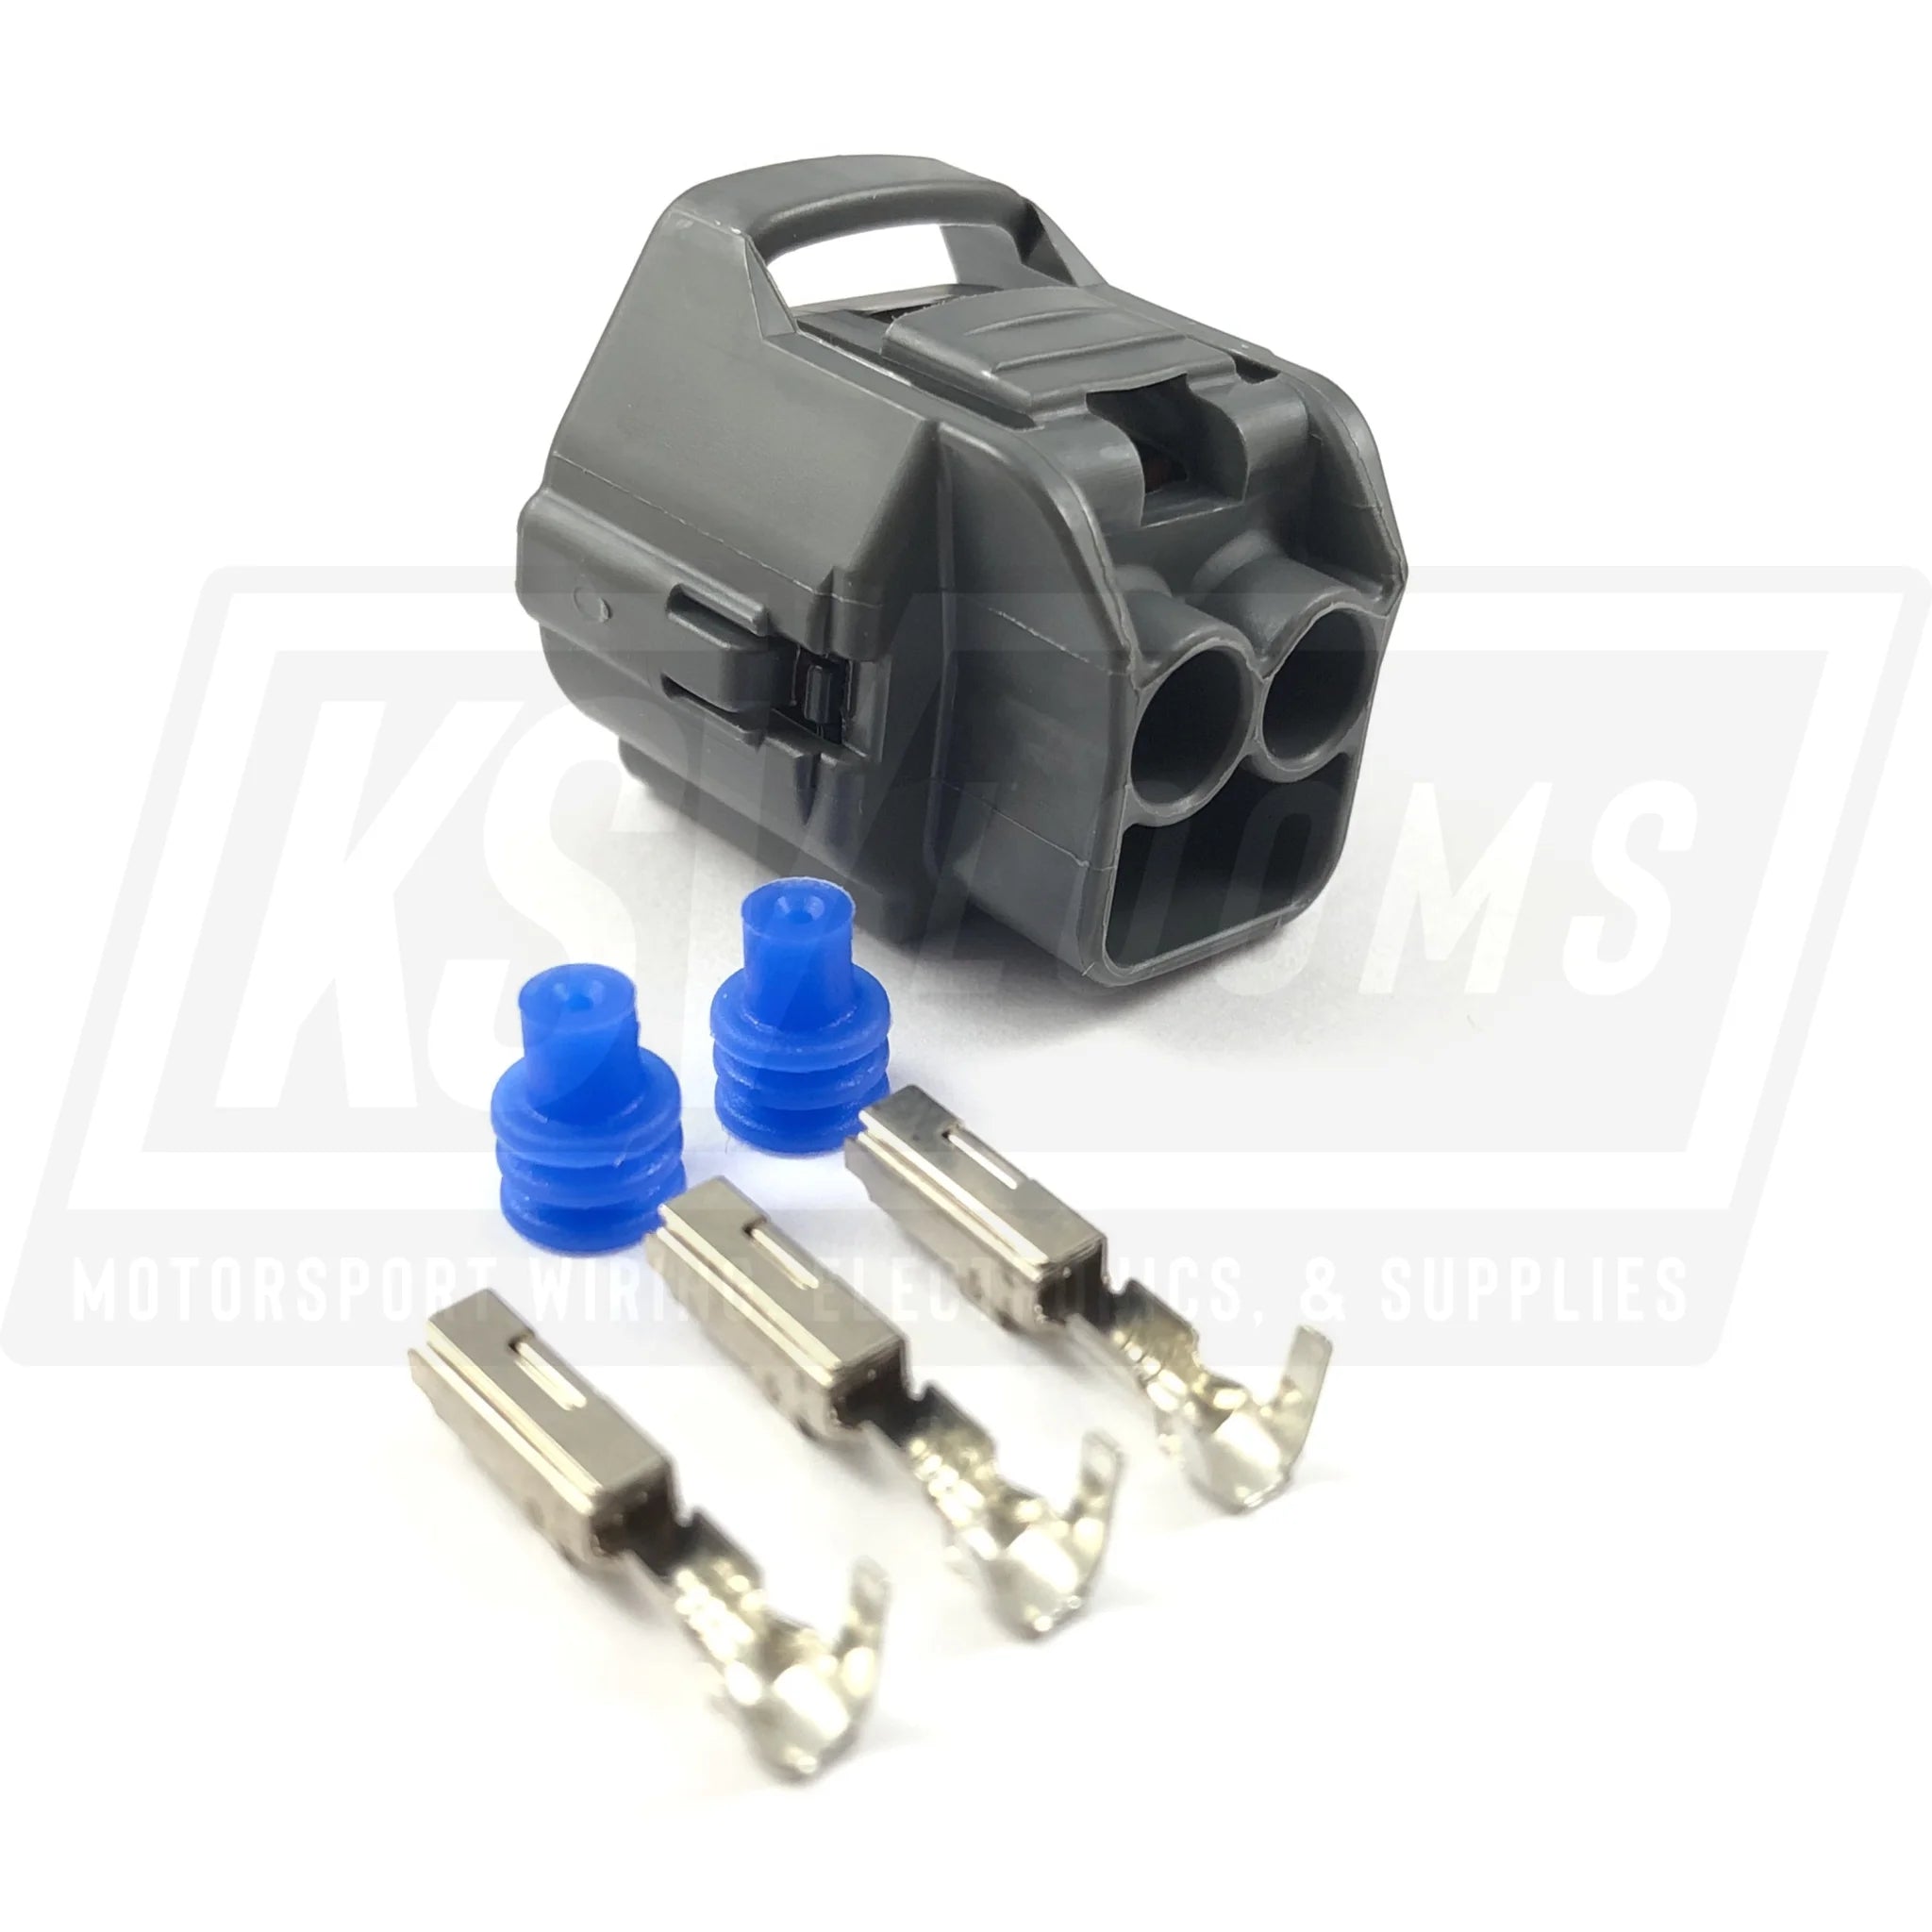 2-Way Connector Kit For Lexus Is300 2Jz-Ge Cam Angle Position Sensor (22-20 Awg)